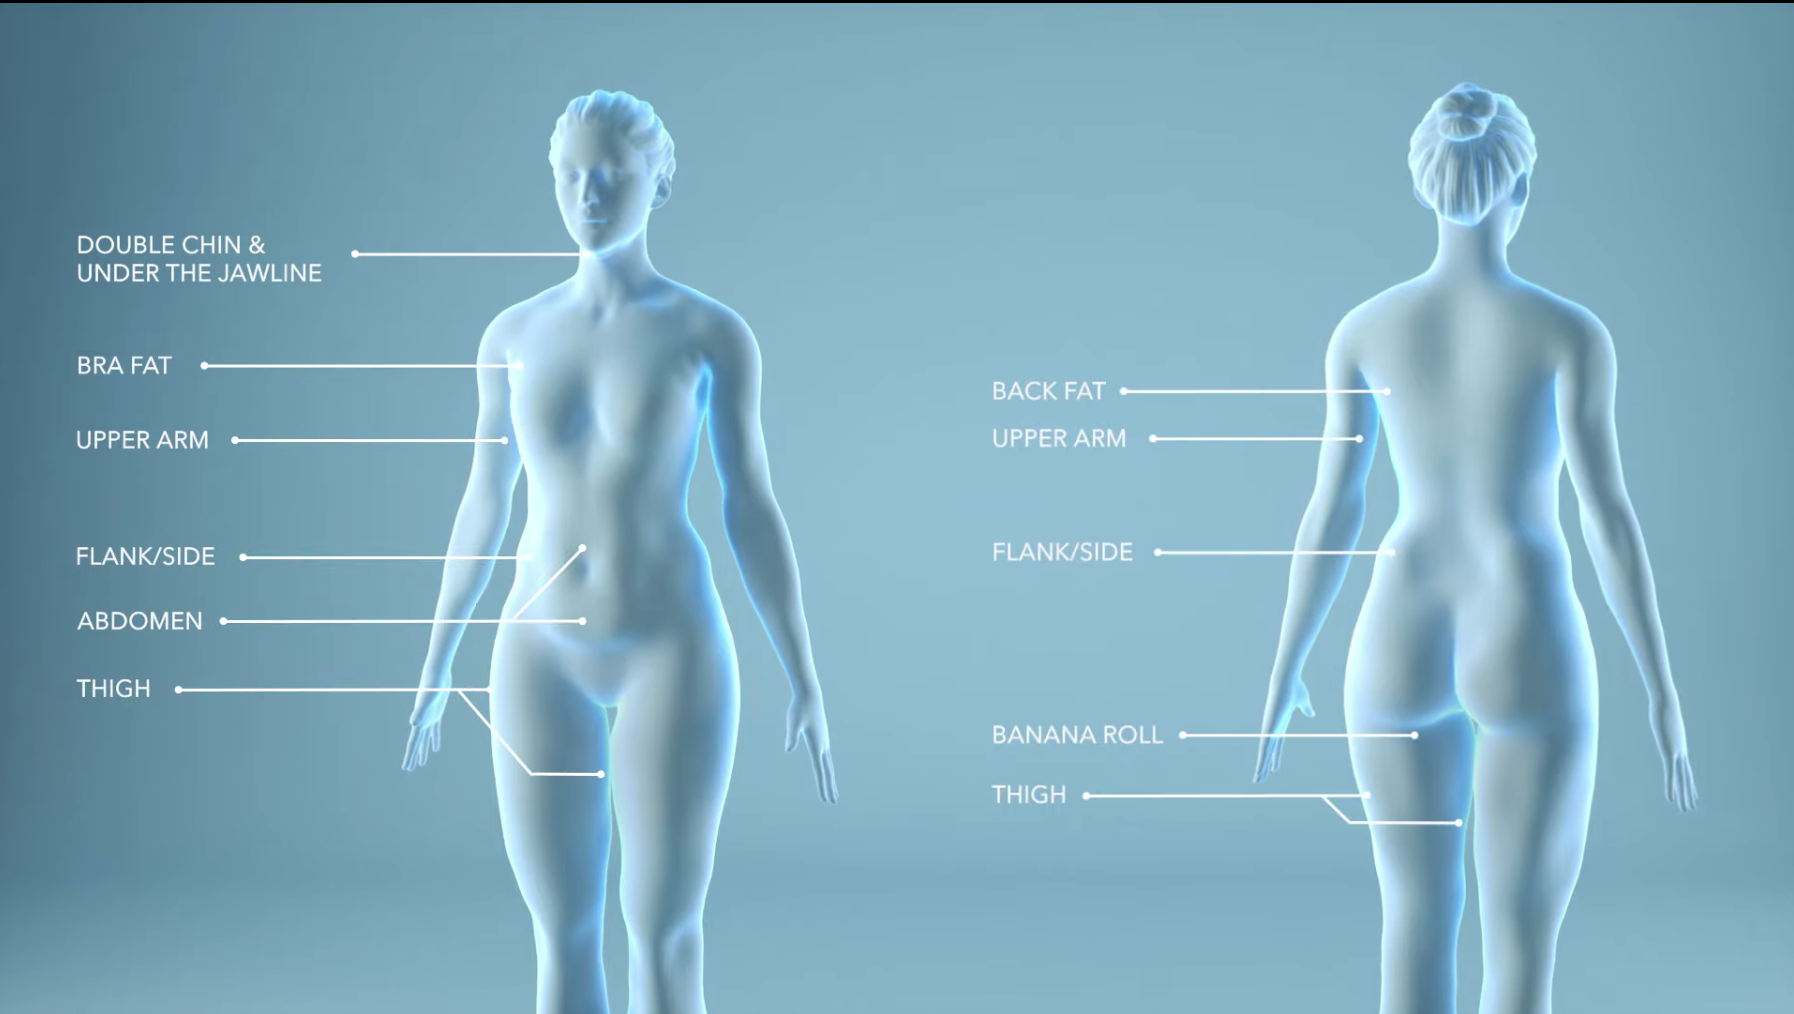 What is CoolSculpting®? How does CoolSculpting work? | CoolSculpting Questions Answered